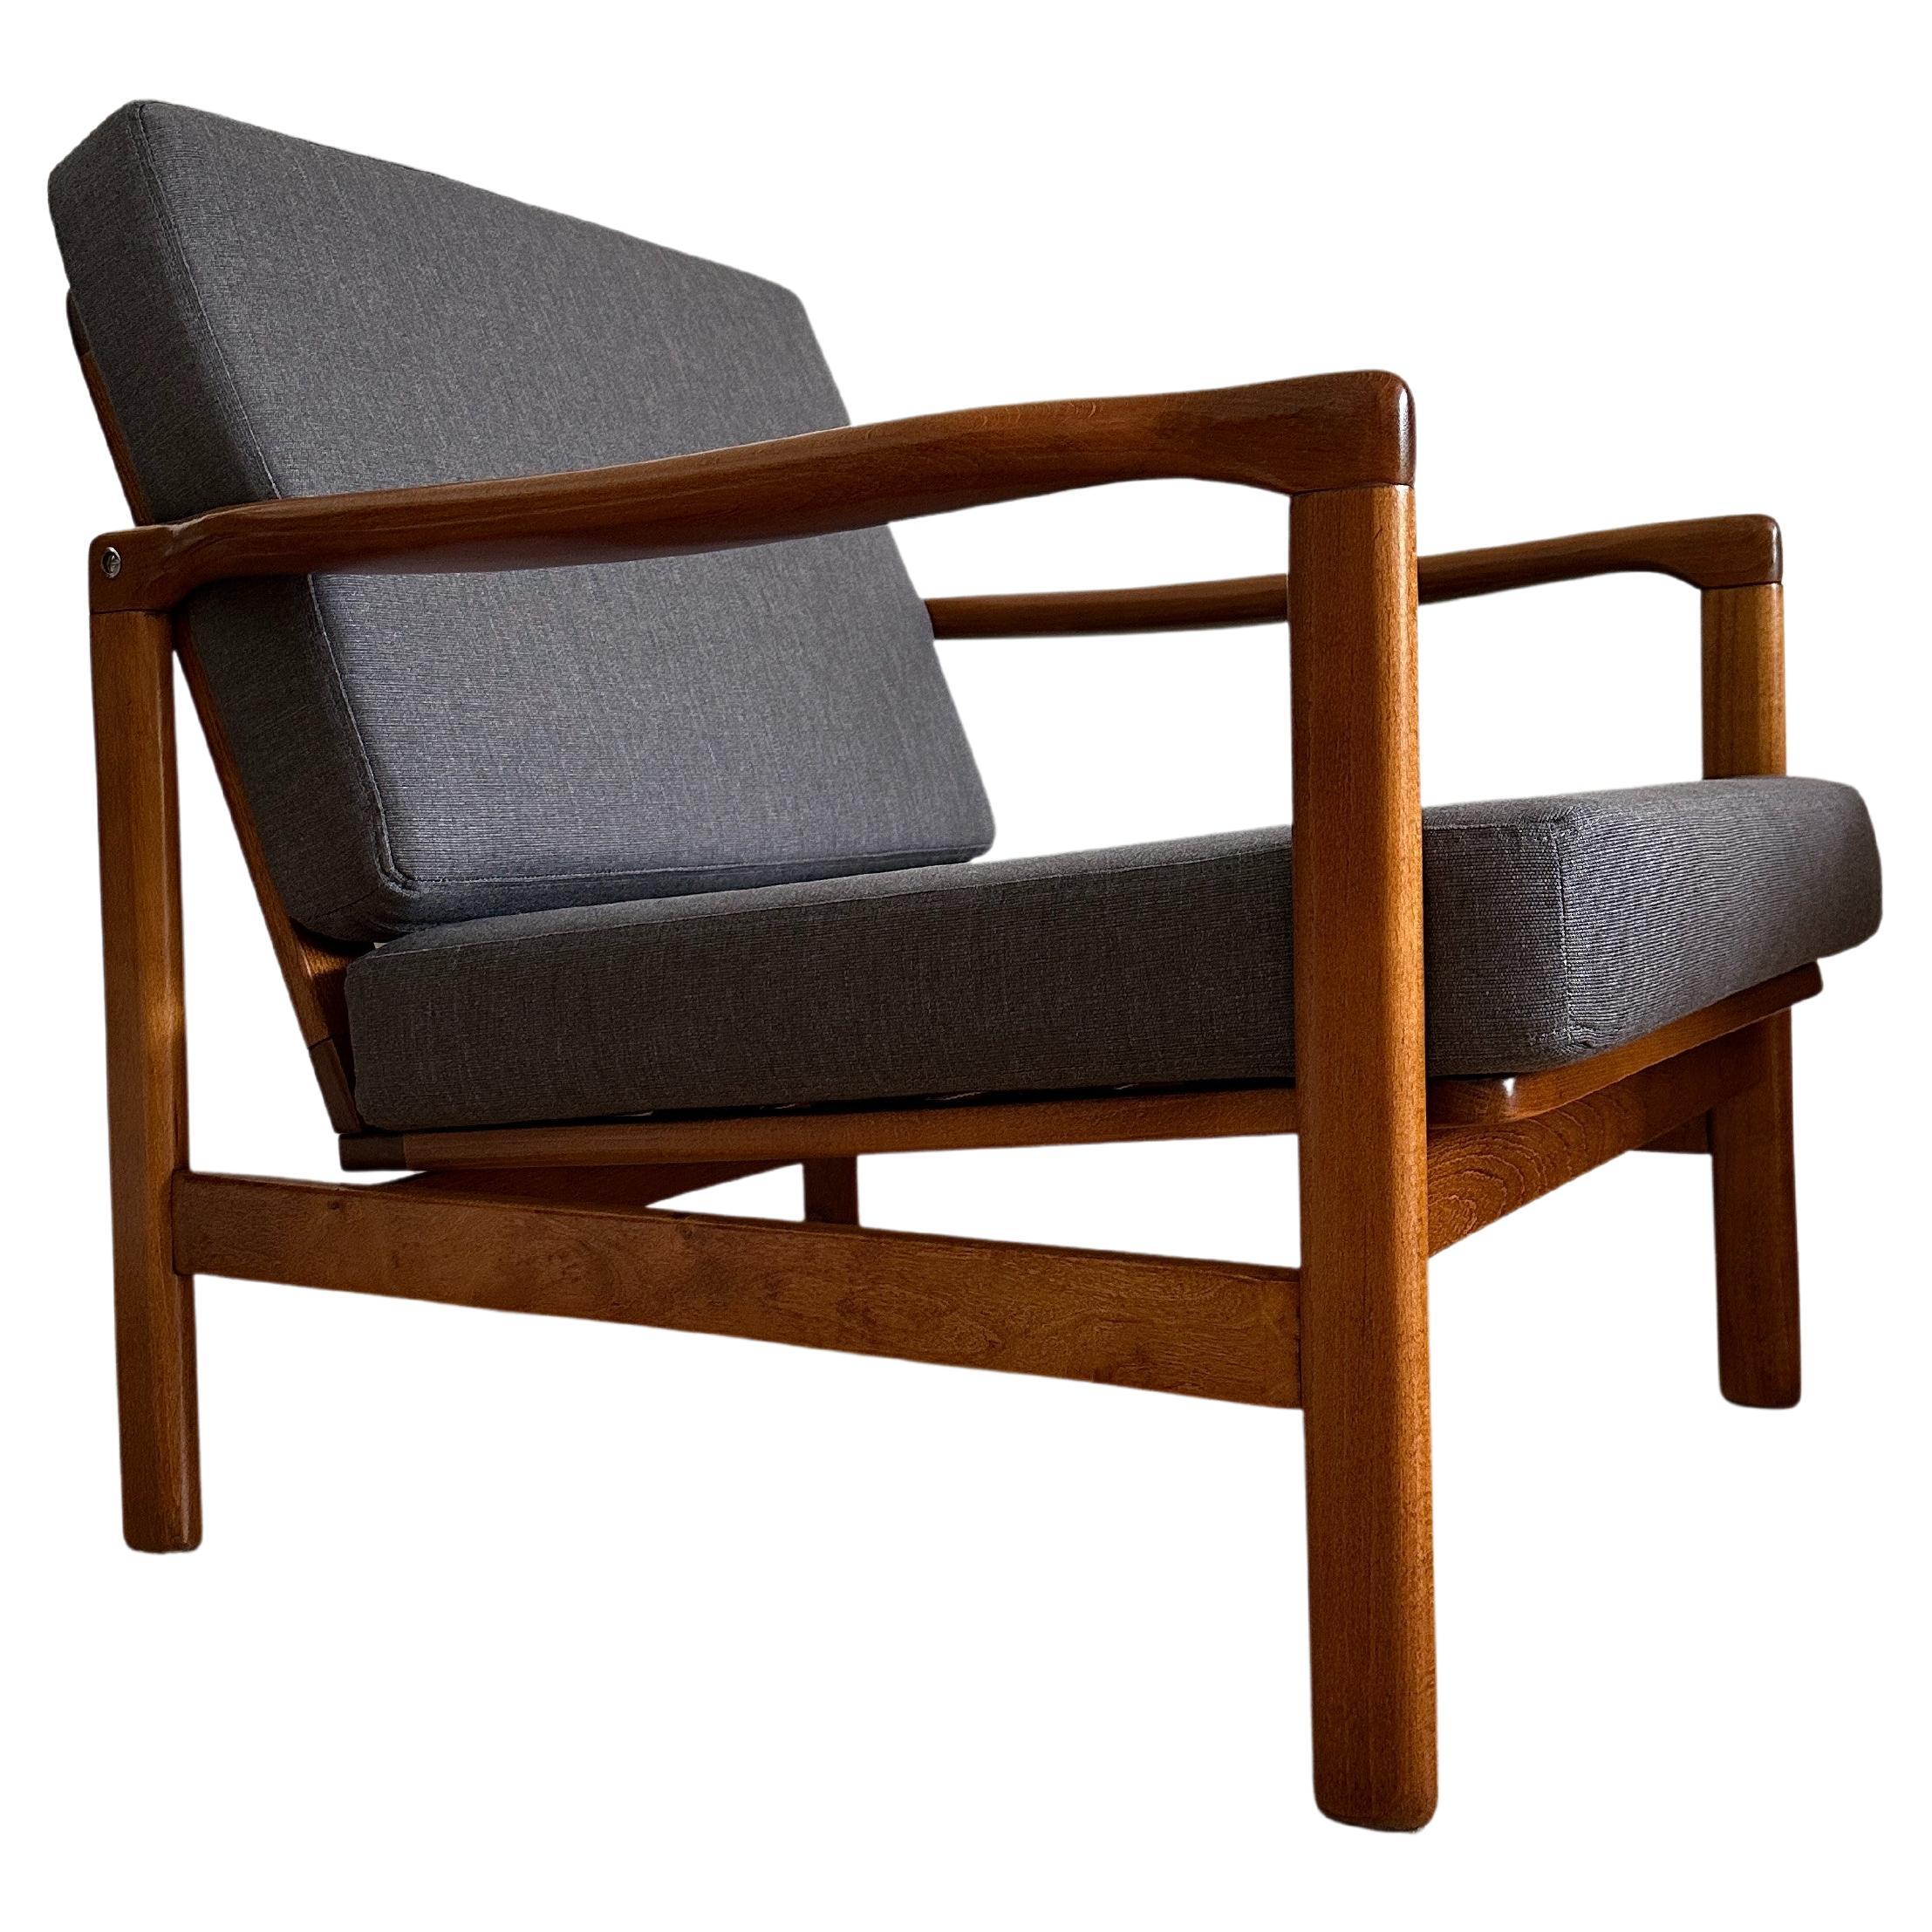 Mid-Century Armchair, Wood and Grey Kvadrat Upholstery, Europe, 1960s For Sale